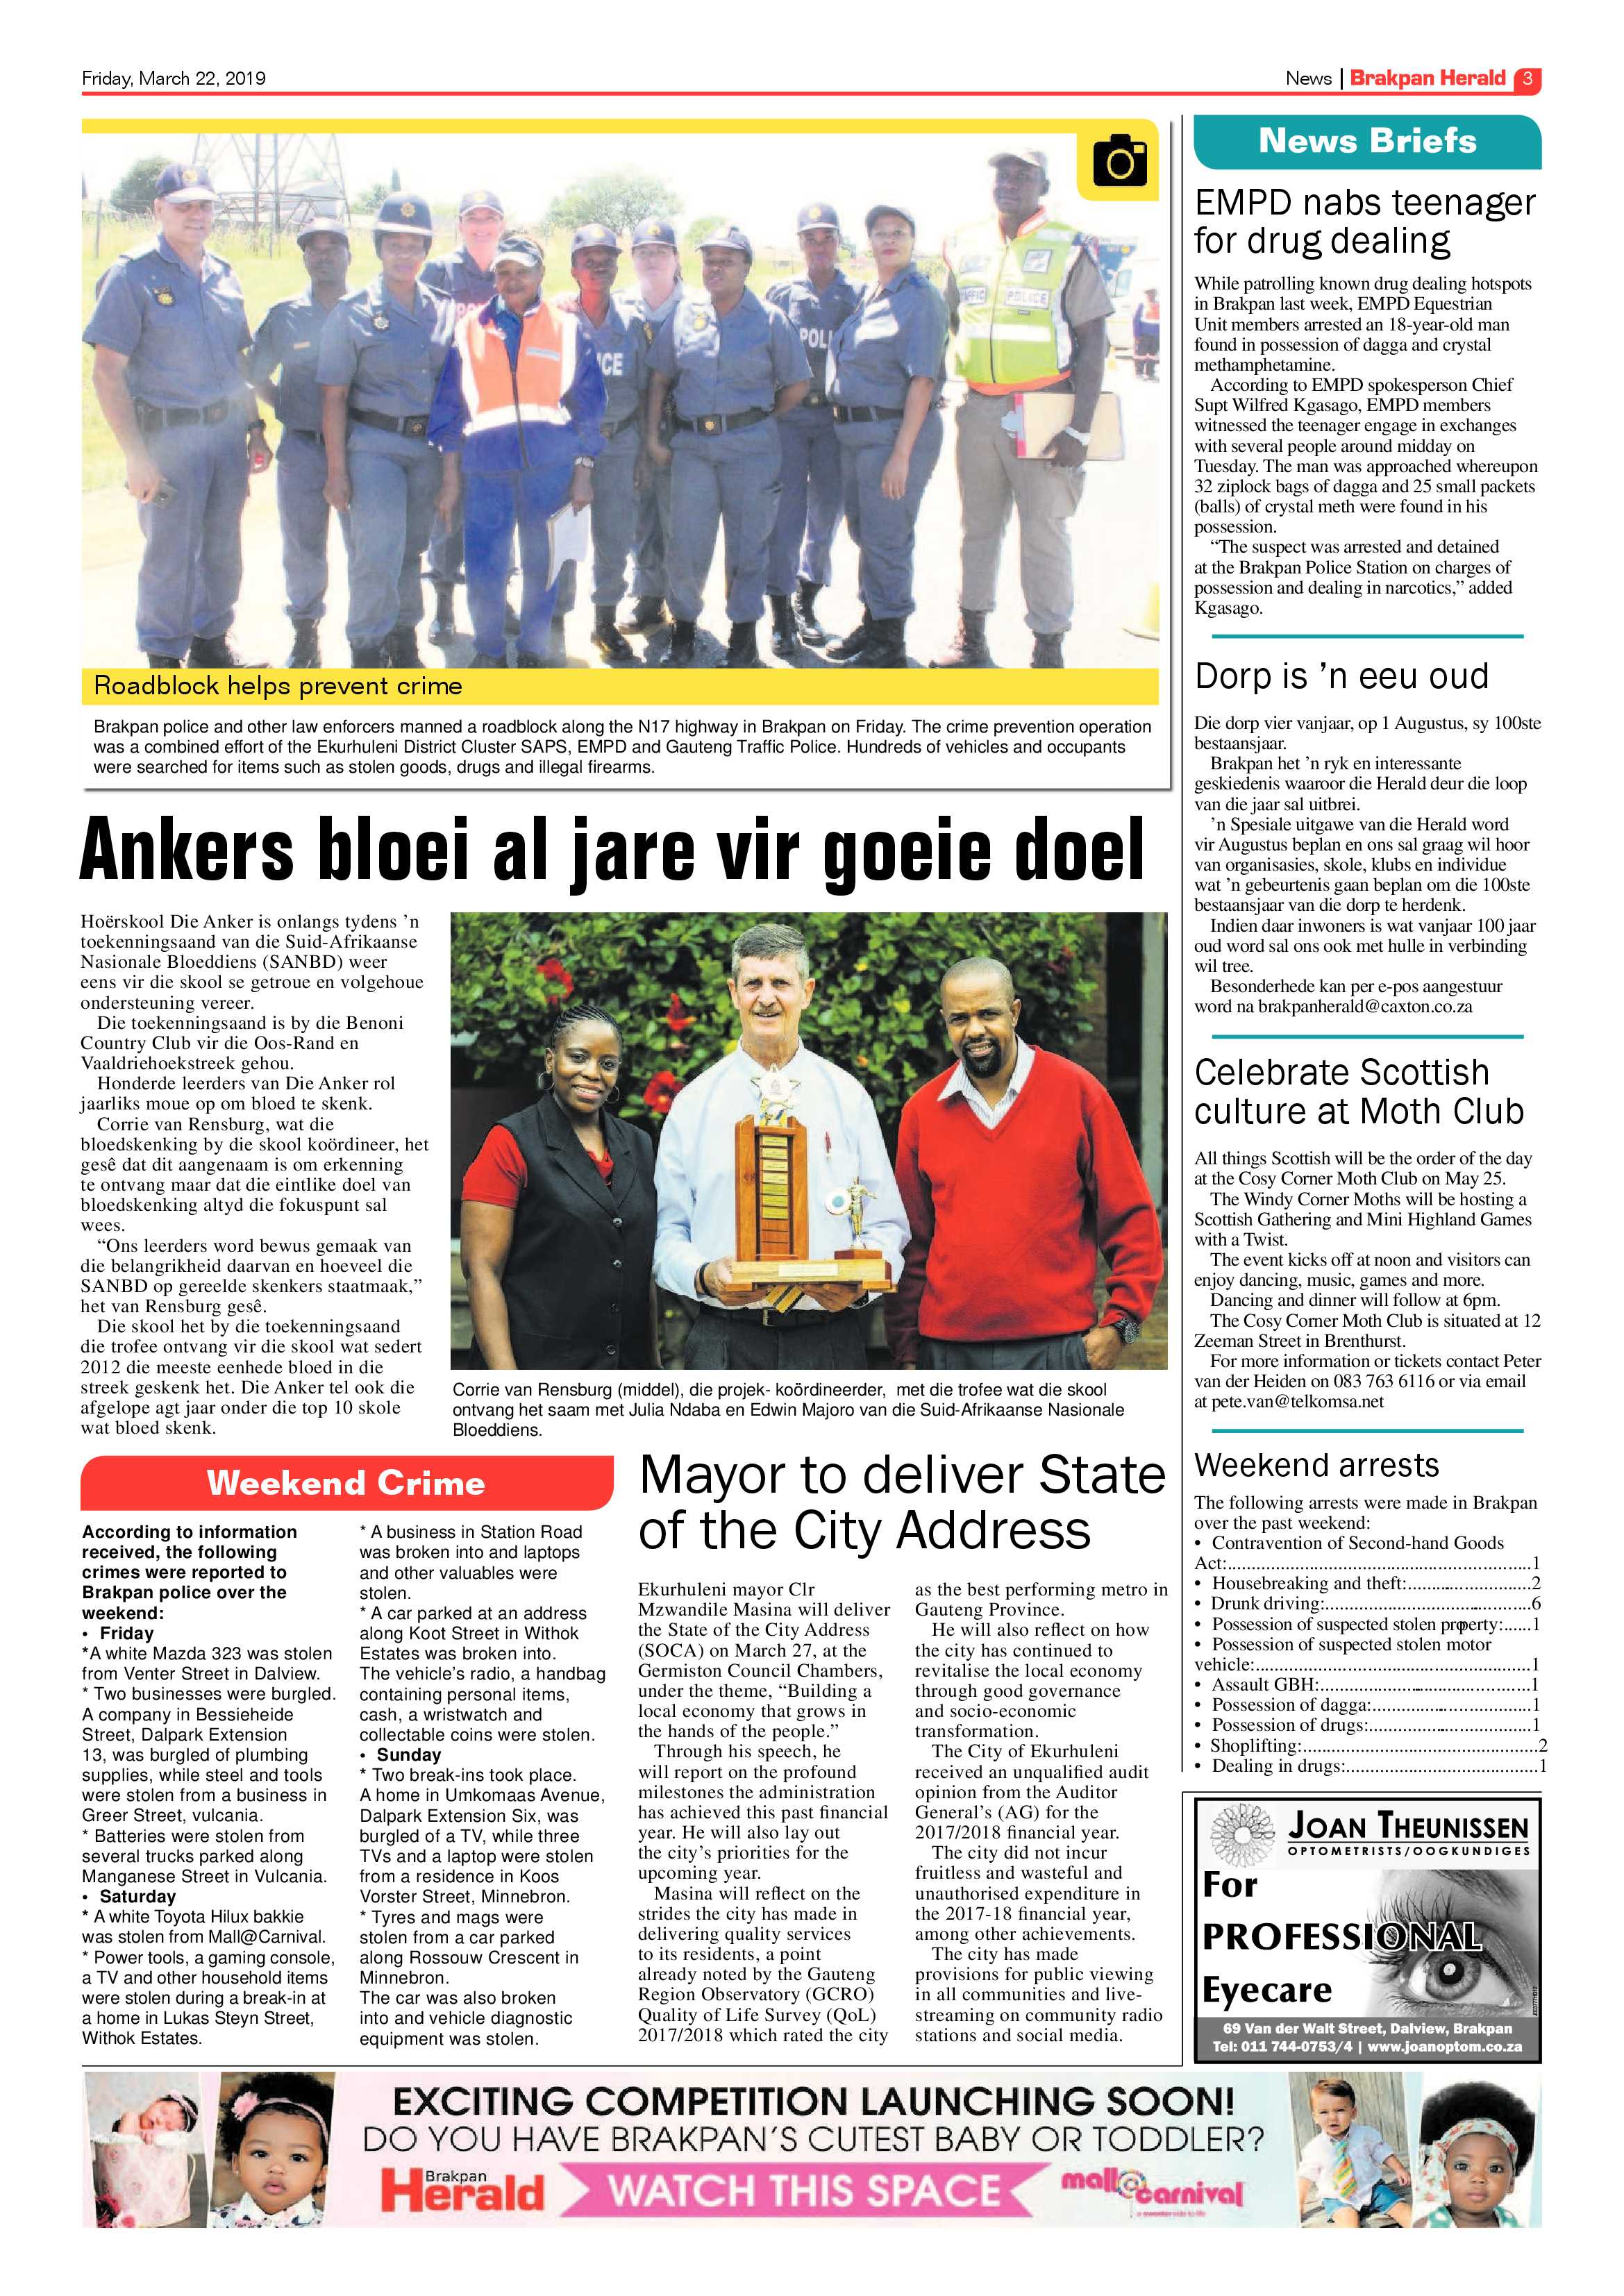 Brakpan Herald 22 March 2019 page 3